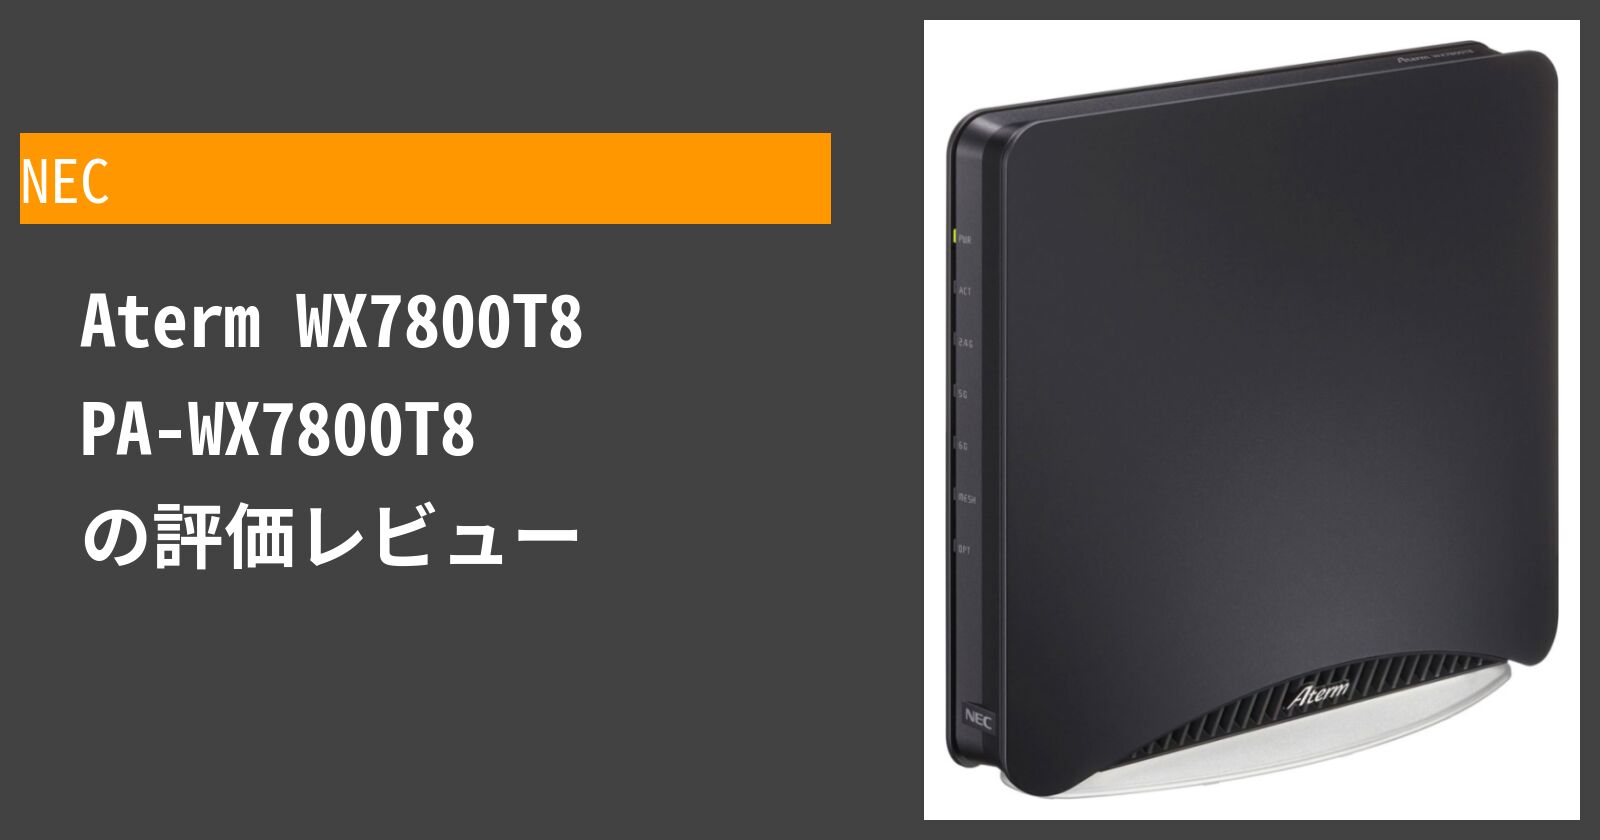  Aterm WX7800T8 PA-WX7800T8 を徹底評価